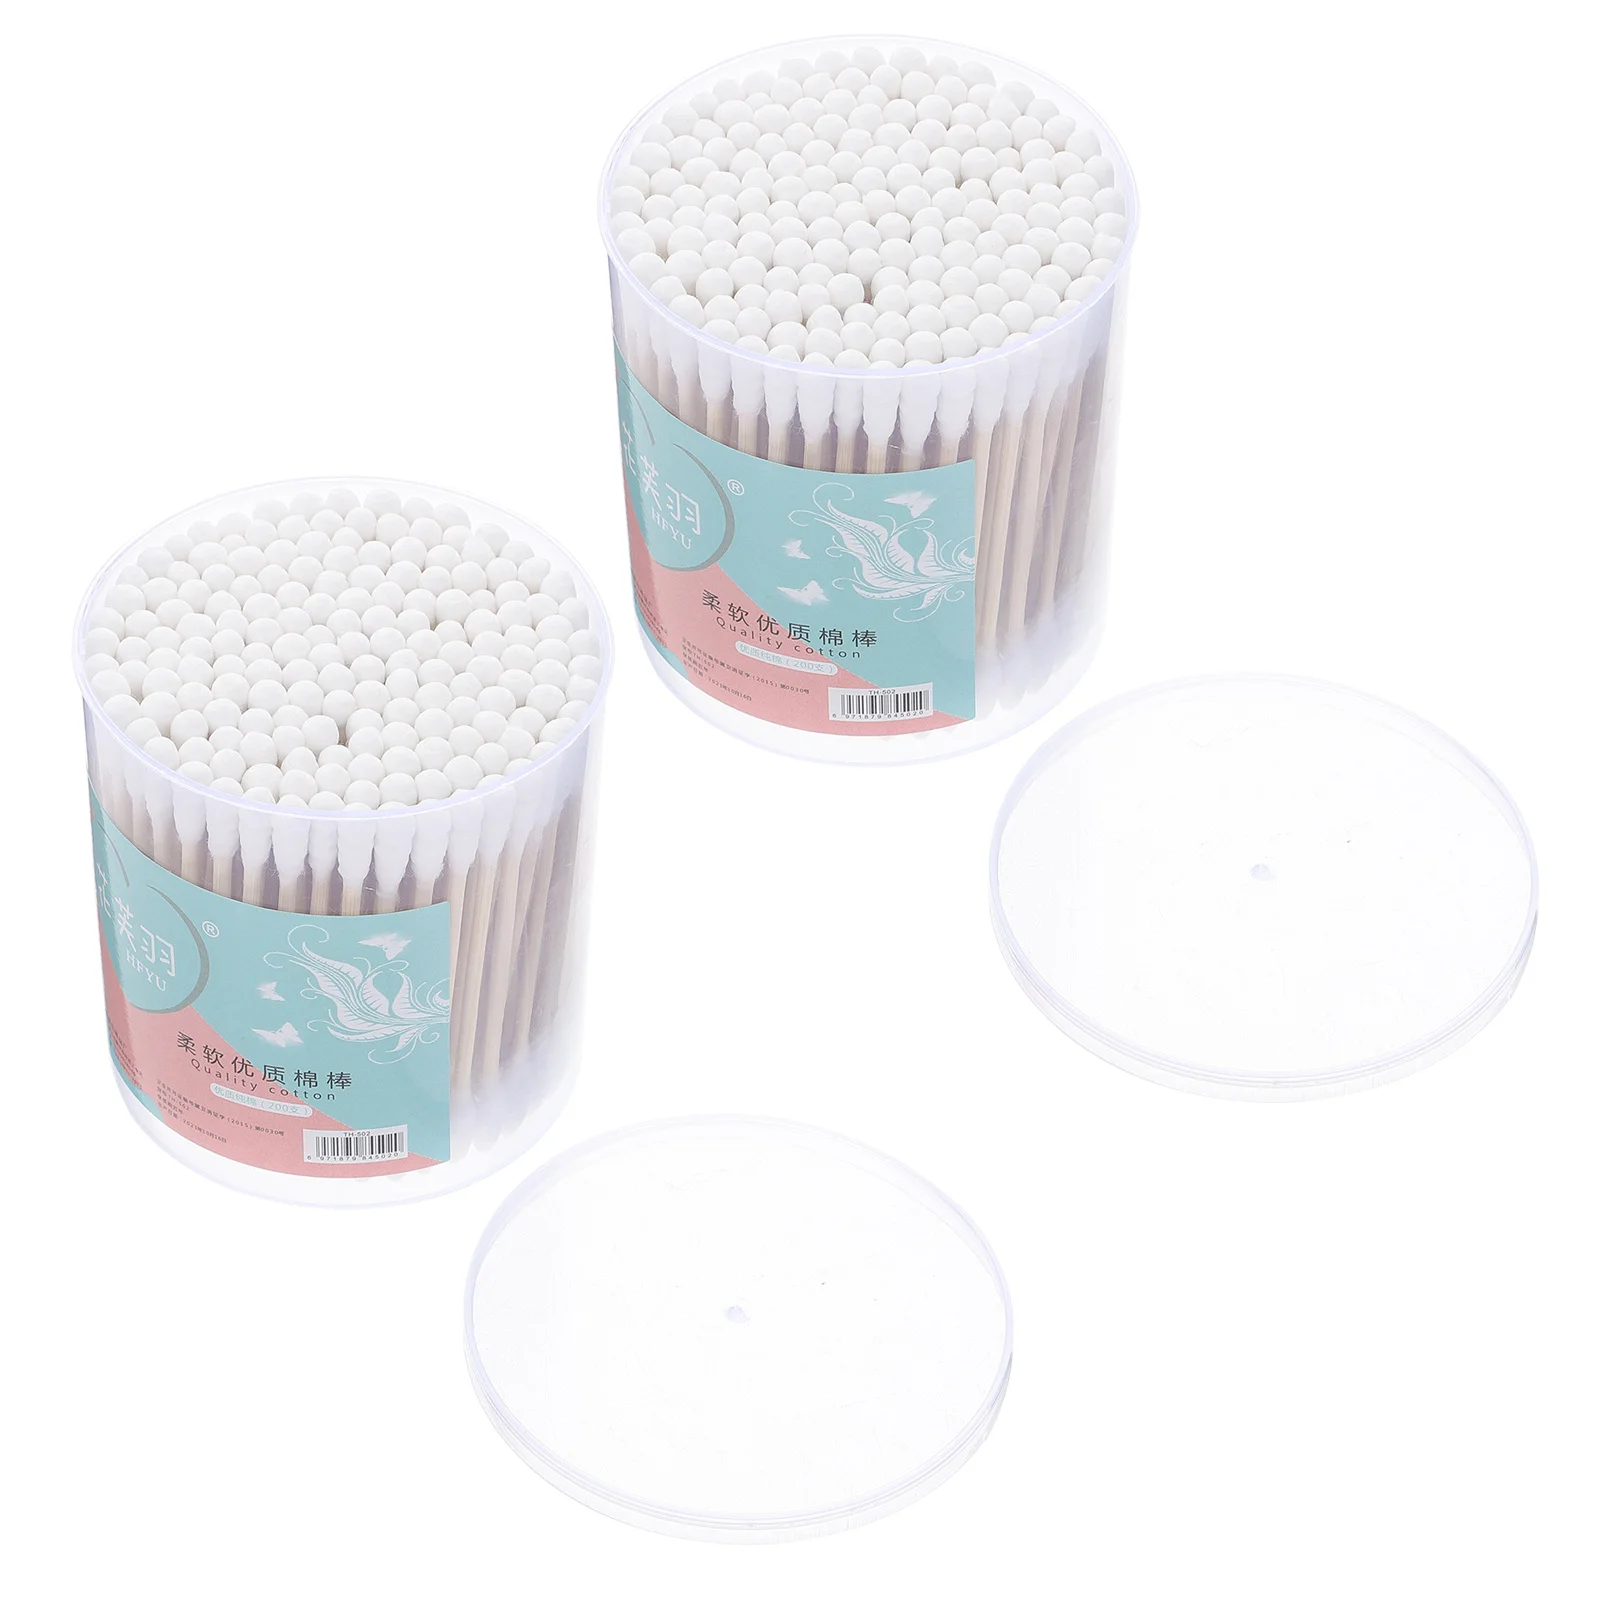 Baby Cotton Swabs 2 Box 400Pcs Baby Safety Swabs Double Spiral Tips Cotton Swabs Paper Sticks Natural Cotton Buds Ear 3 boxes cotton swab swabs baby earpick multifunction buds for kids absorbent double ended multi purpose sticks care